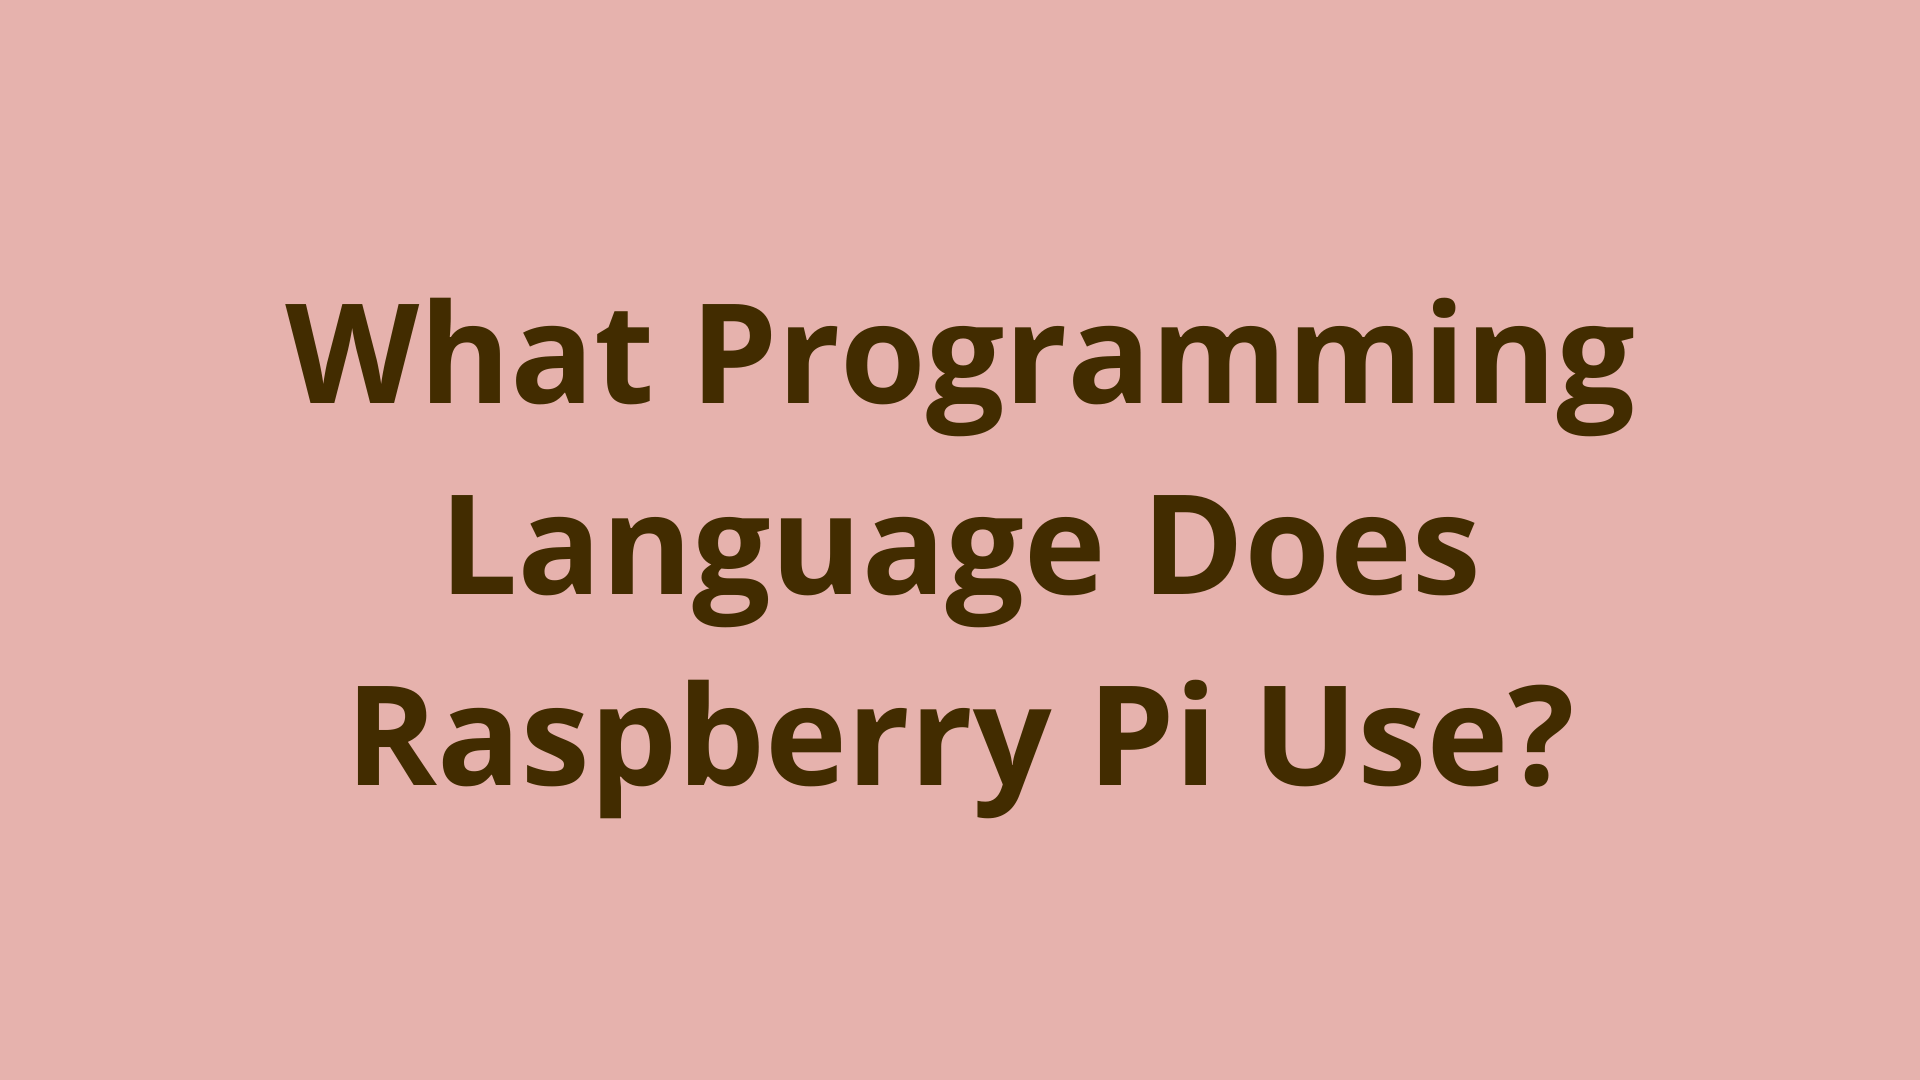 Image of What Programming Language Does Raspberry Pi Use?